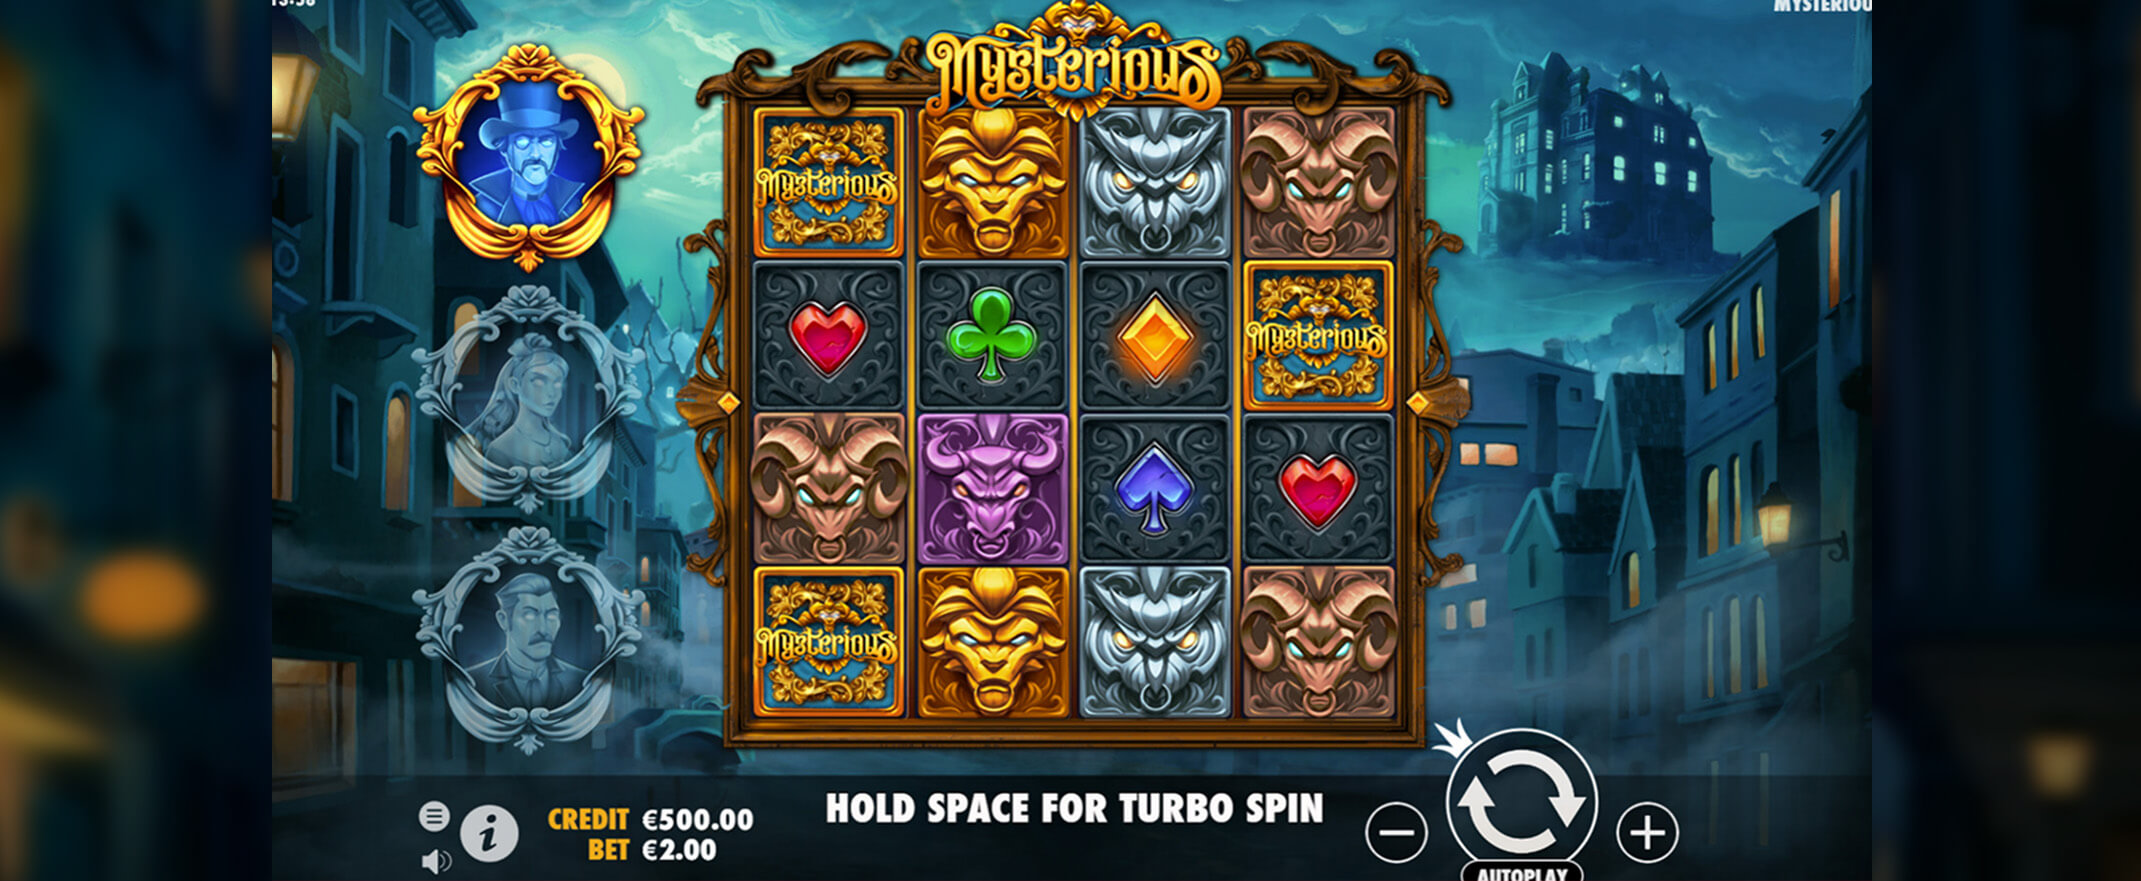 Mysterious slot review - image of the reels